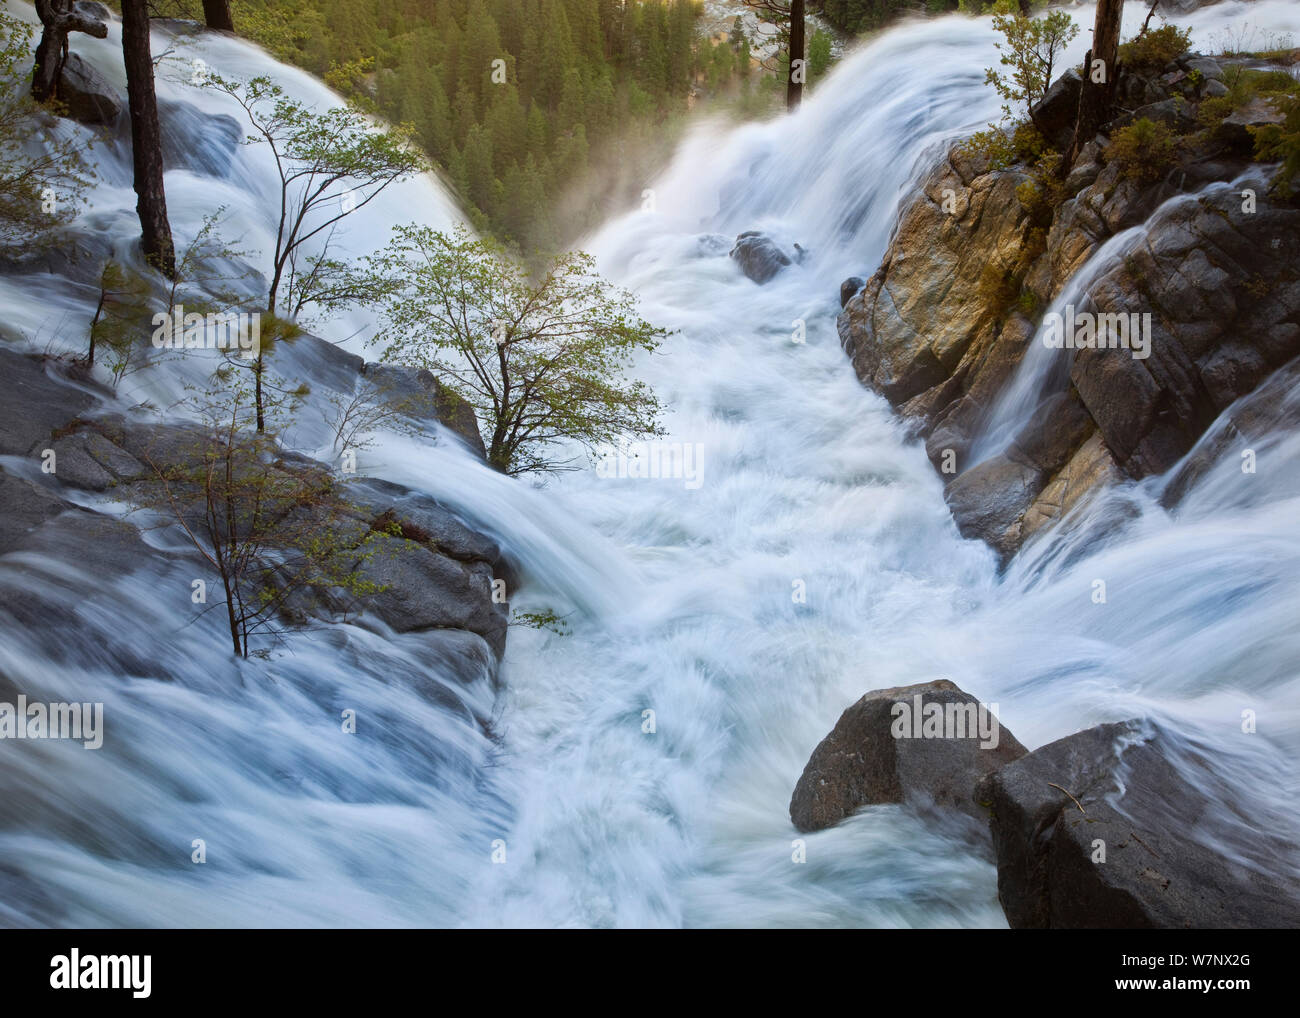 Water from the spring melt of snow at high elevations creating an immense volume of water, California's Yosemite National Park, June. Stock Photo